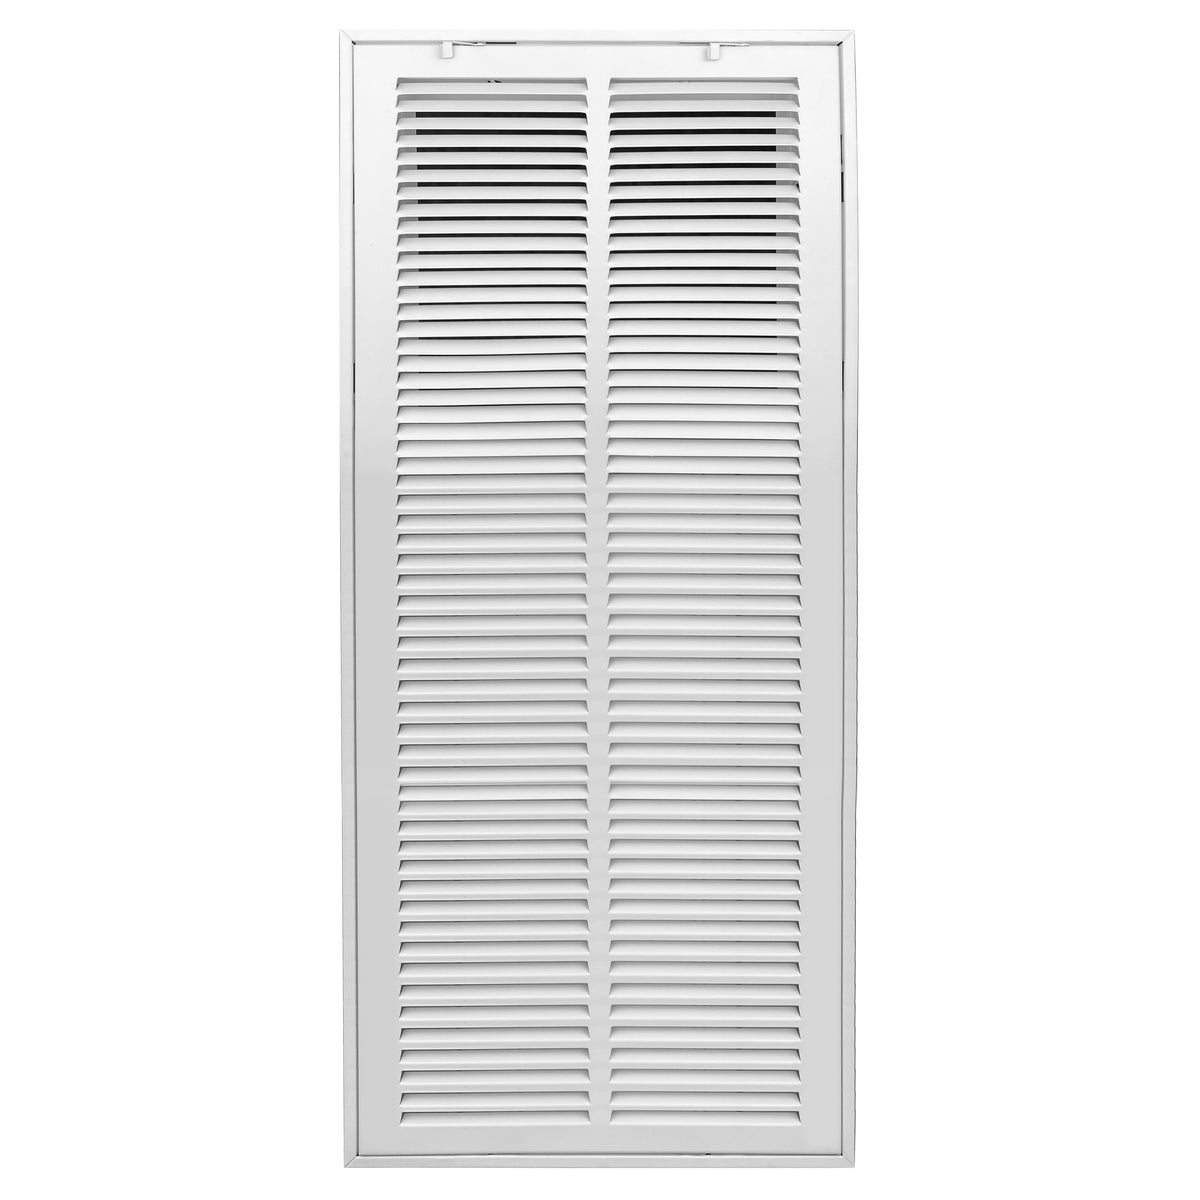 airgrilles 14" x 30" duct opening  -  steel return air filter grille for sidewall and ceiling hnd-rafg1-wh-14x30 752505979663 - 1